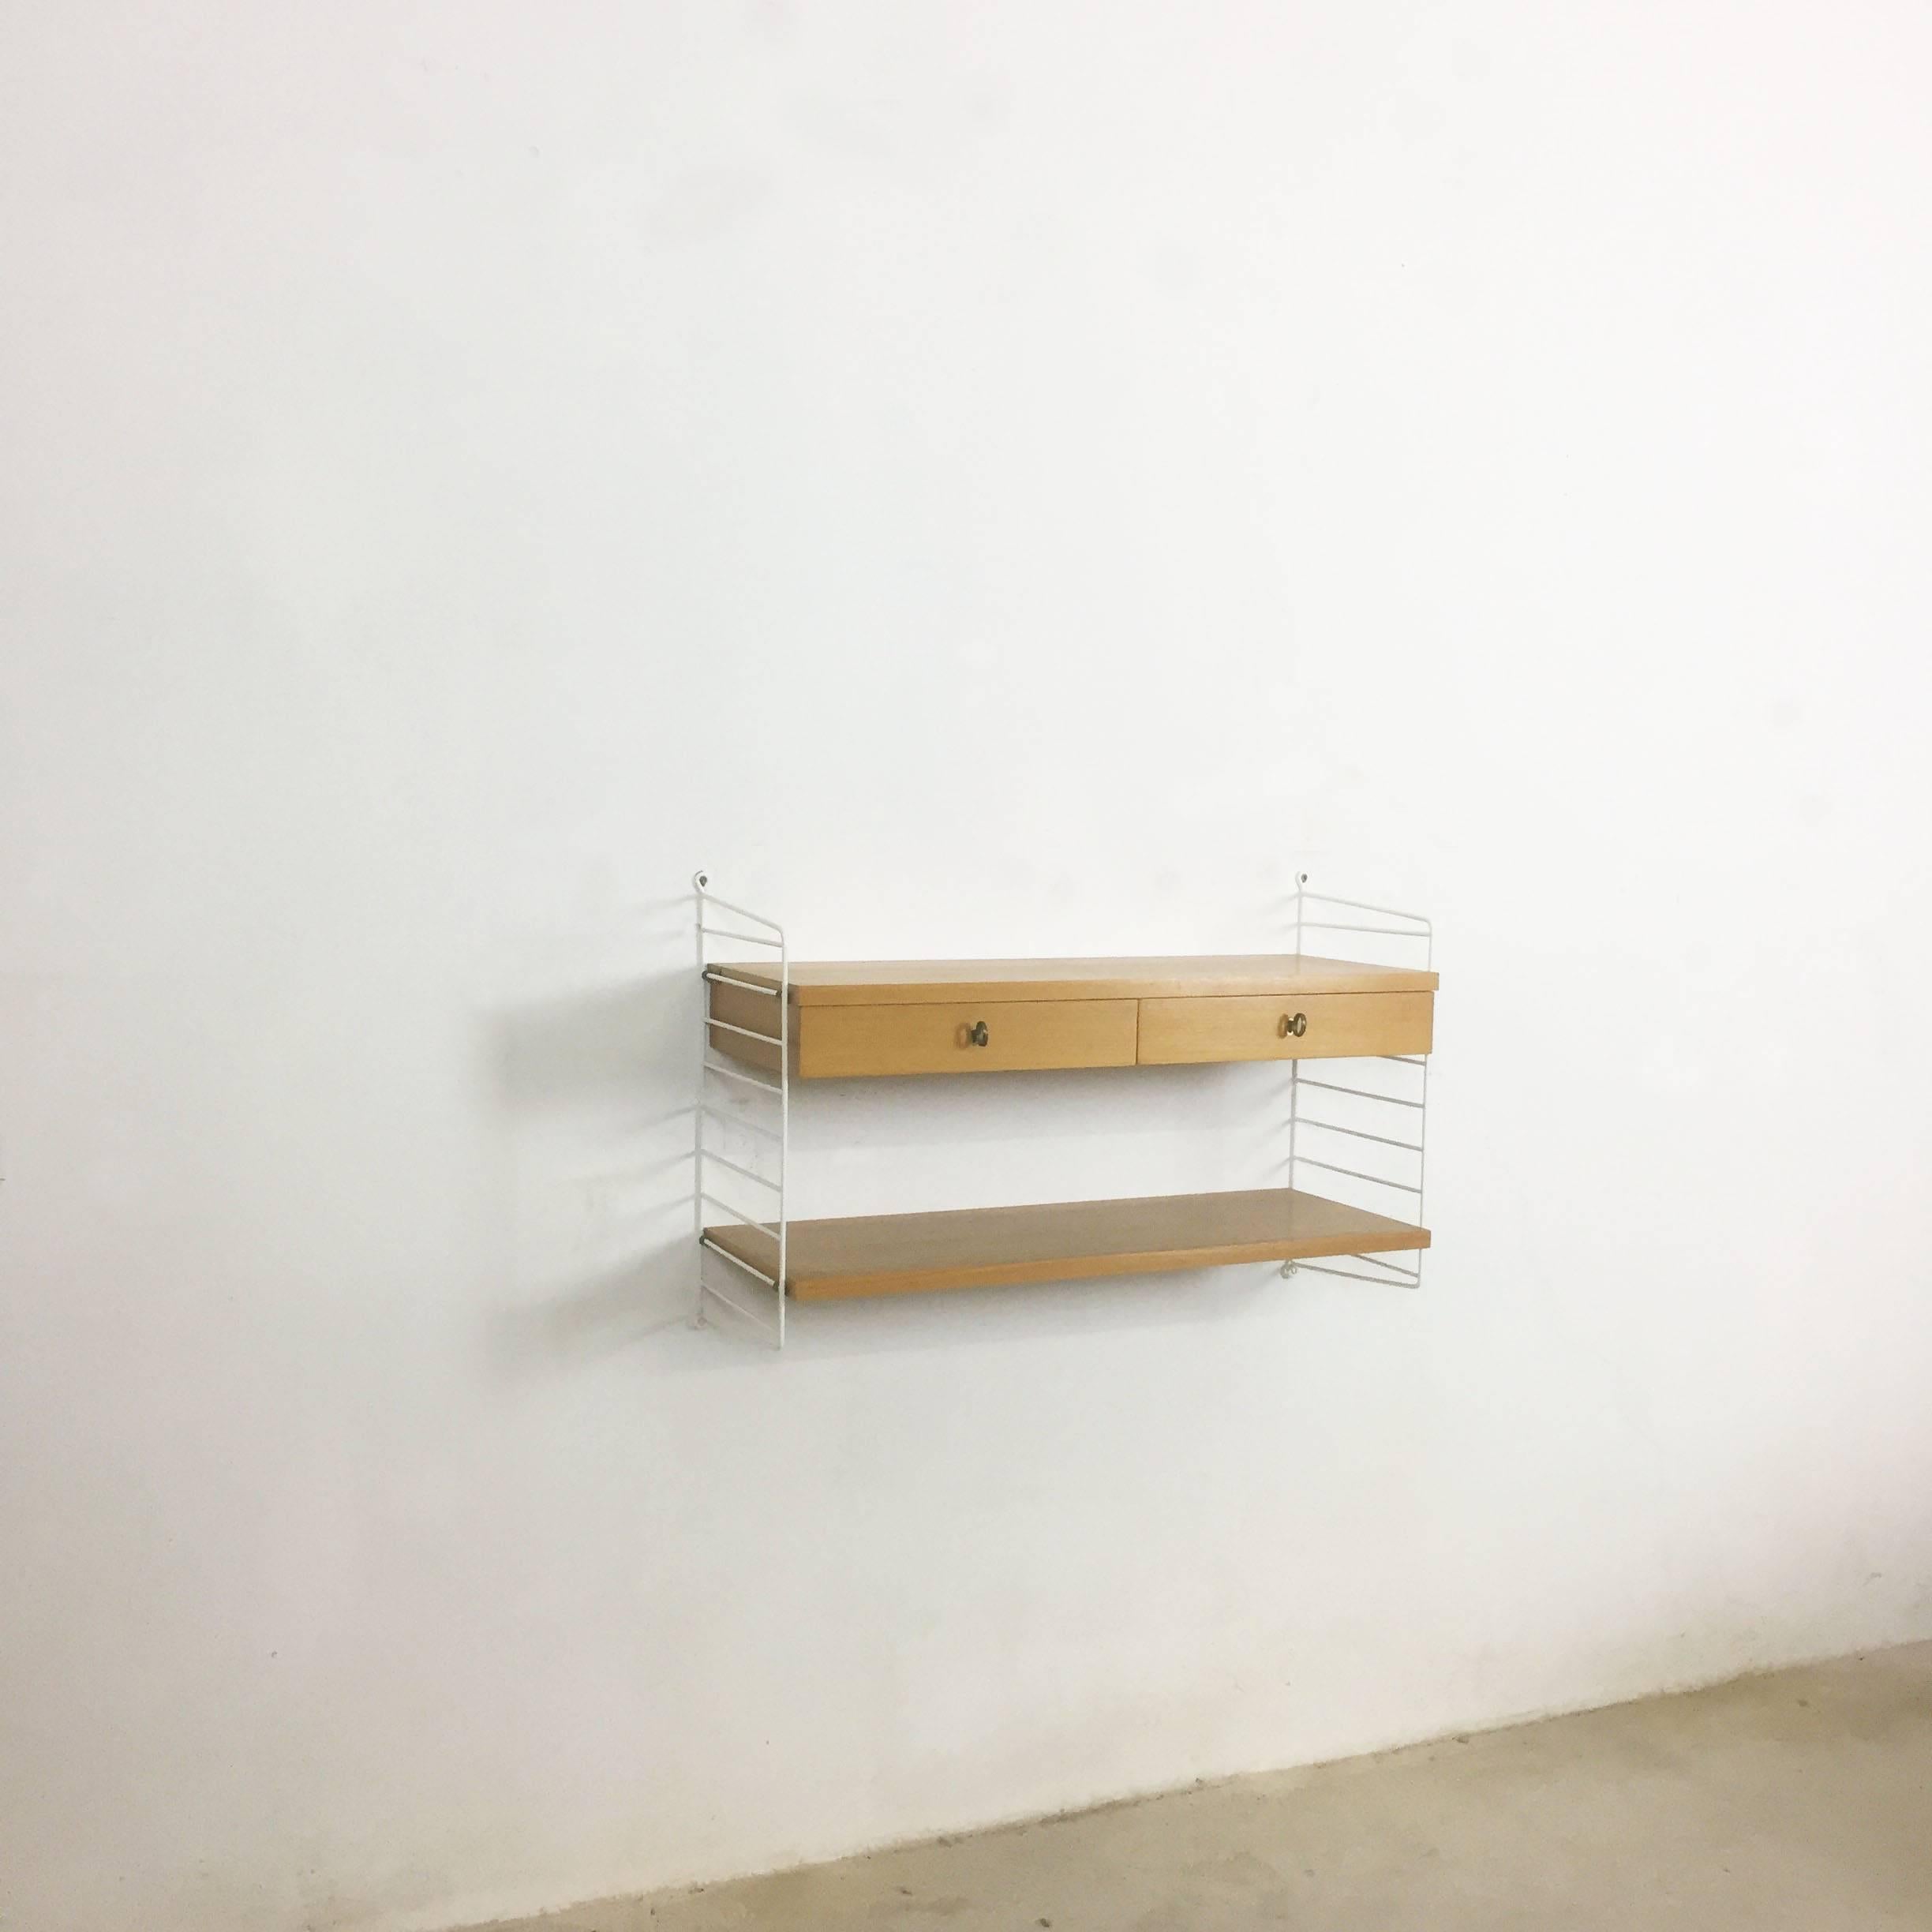 String regal wall unit

Made in Sweden

Bokhyllan 'the Ladder Shelf'

Design: Nils und Kajsa Strinning, 1949

The architect Nisse Strinning was born in 1917. From 1940-1947 he studied architecture in Stockholm, before he designed the